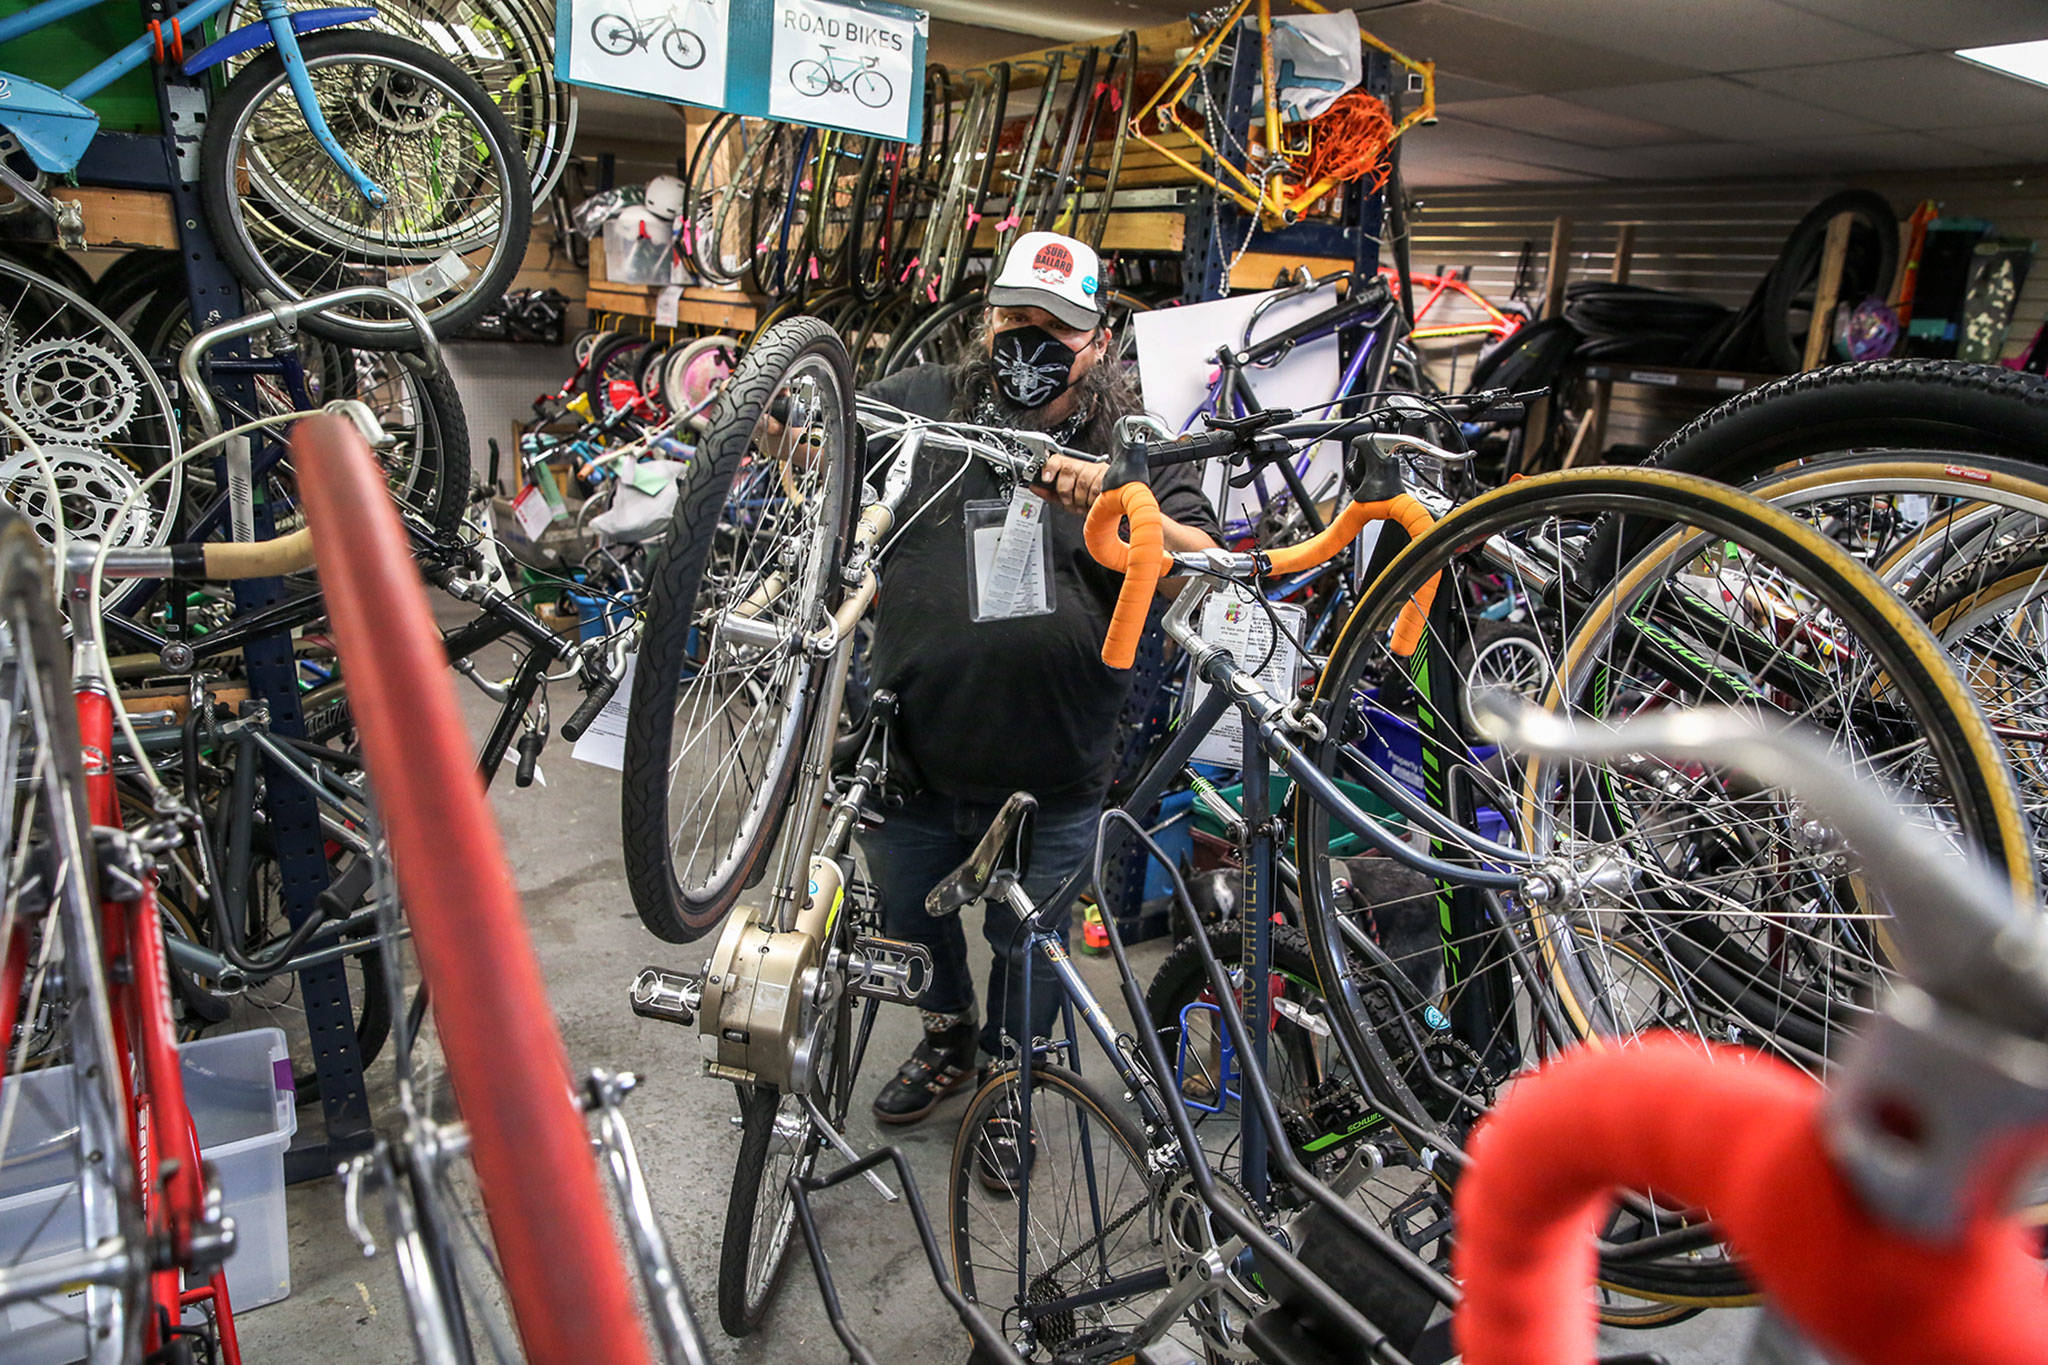 Need new-to-you bike? Its time for a sale at Sharing Wheels HeraldNet